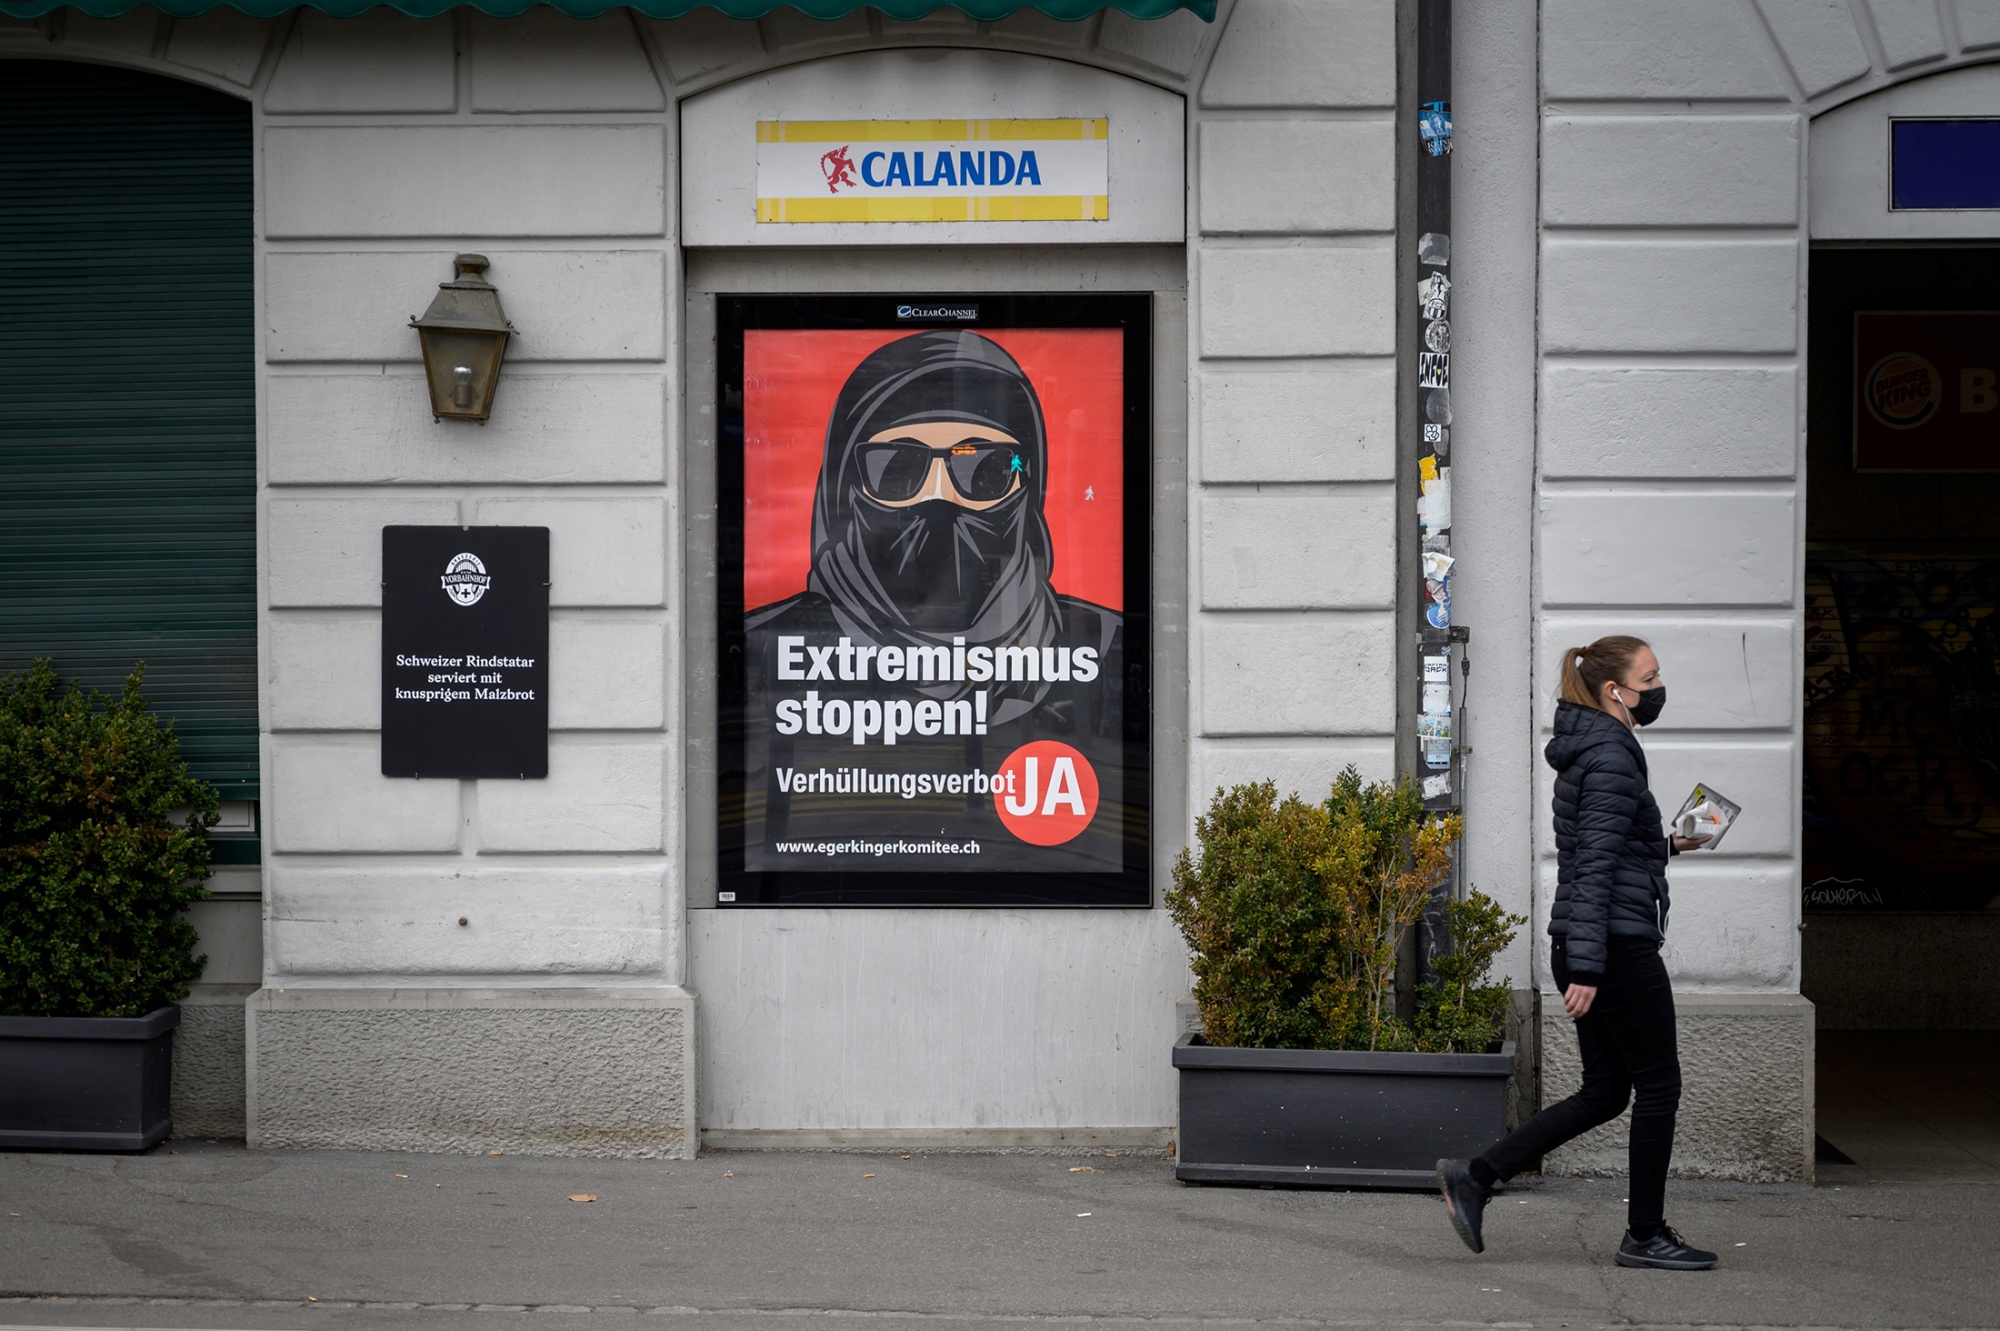 While the ban applies to all garments that cover a person’s full face, the campaign particularly focused on religious veils, with some Muslim women choosing to wear the burqa.&nbsp;